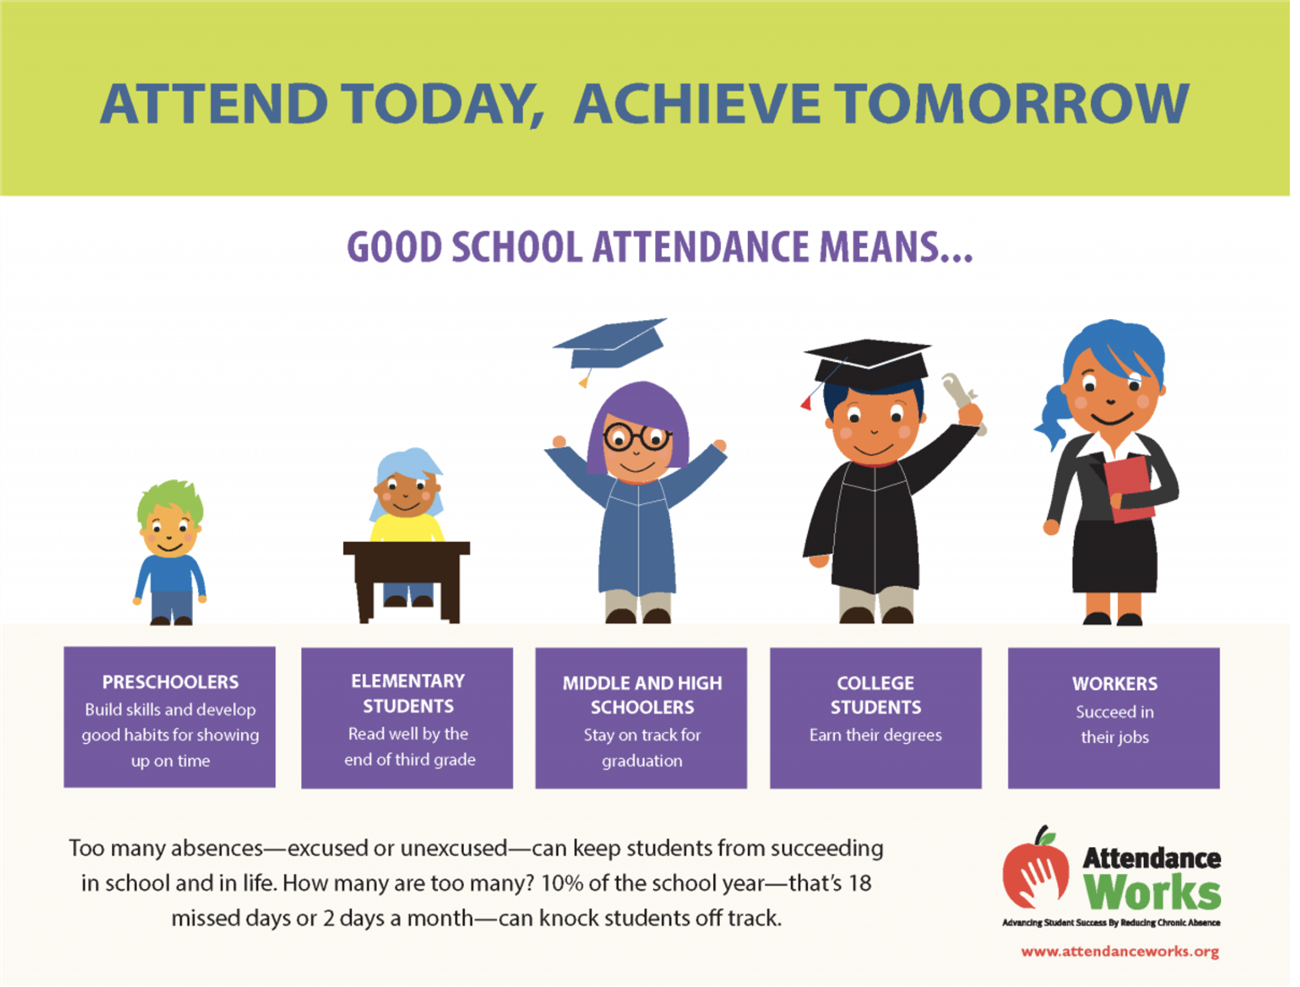  A picture with attendance breakdown Good School Attendance Means Preschoolers build skills and develop good habits for showing up on time Elementary students read well by the end of third grade Middle and High schooles stay on tract for graduation College students earn their degrees 